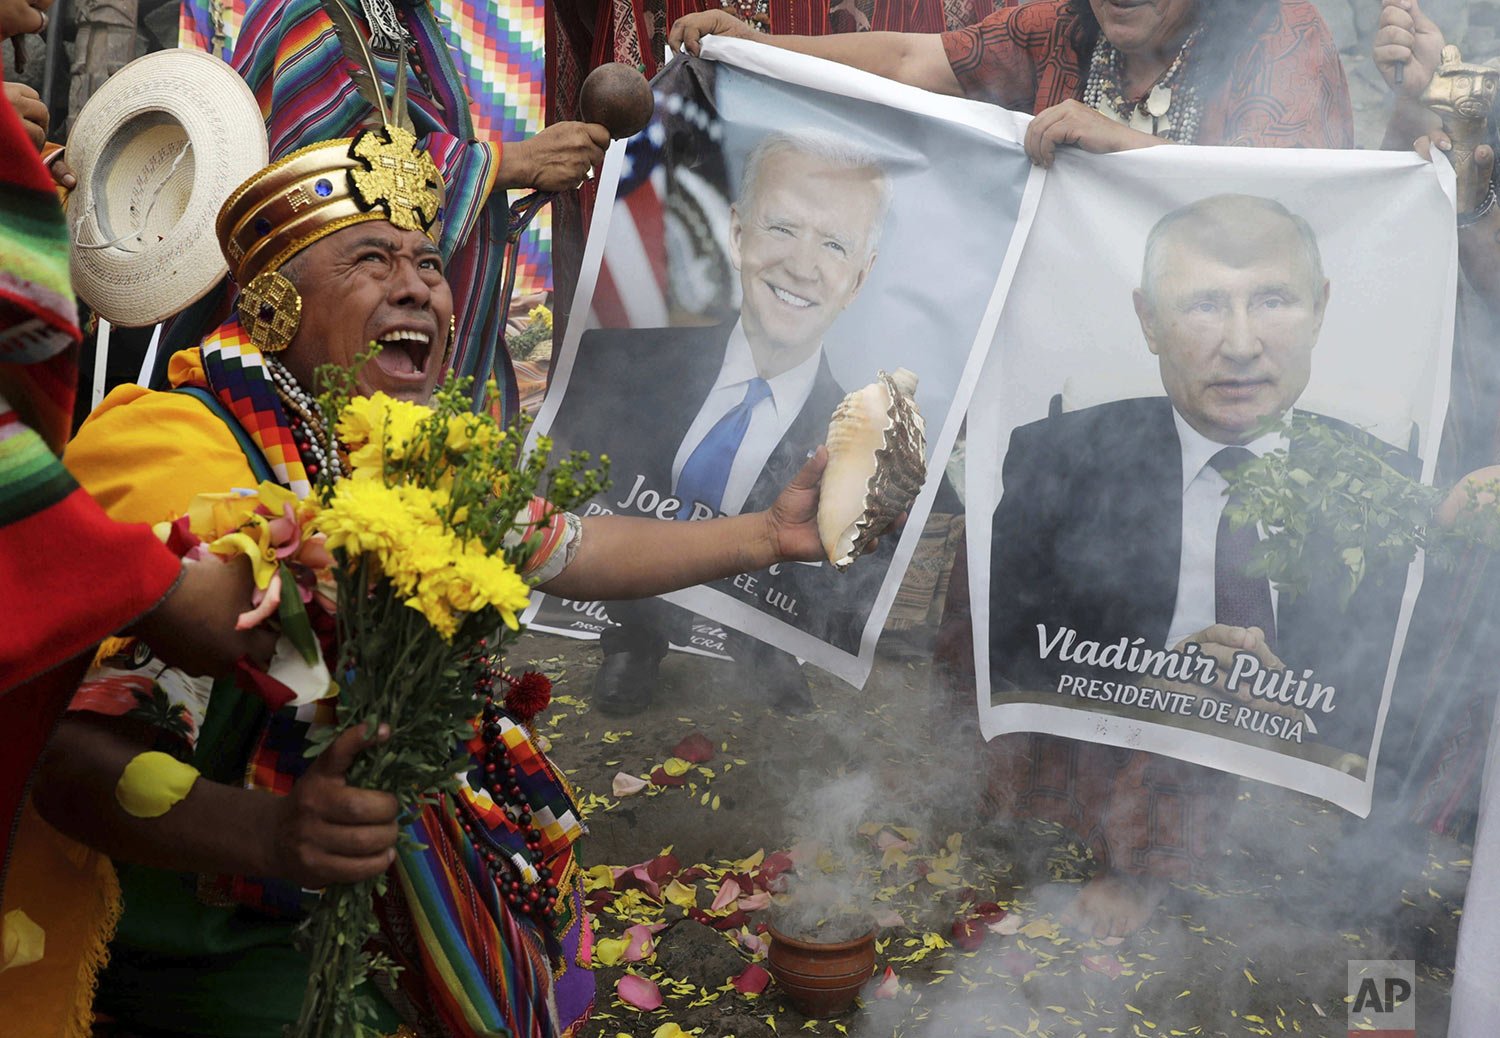  Shamans hold photos of U.S. President Joe Biden and Russia's President Vladimir Putin during a year-end ritual where they predict political and social issues expected to occur in next year in Lima, Peru, Dec. 29, 2021. (AP Photo/Guadalupe Pardo) 